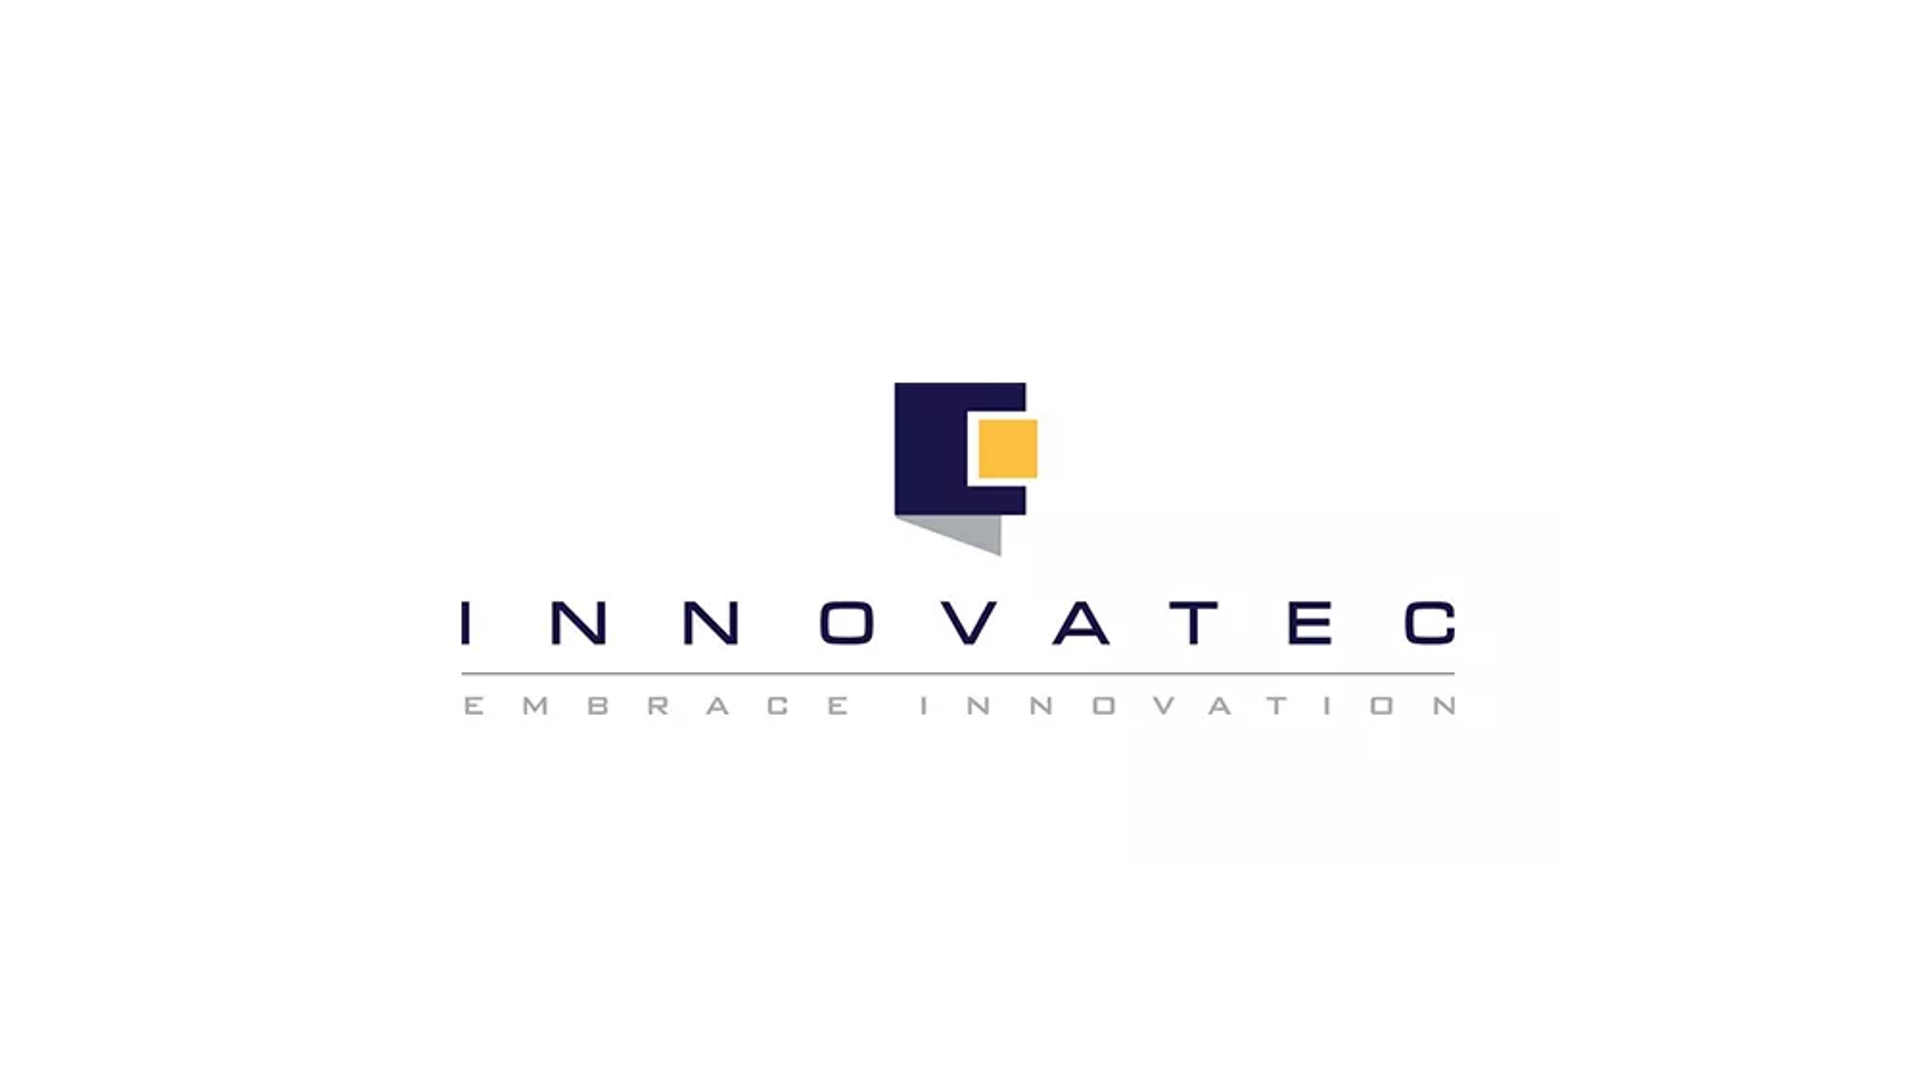 A_innovatec.png